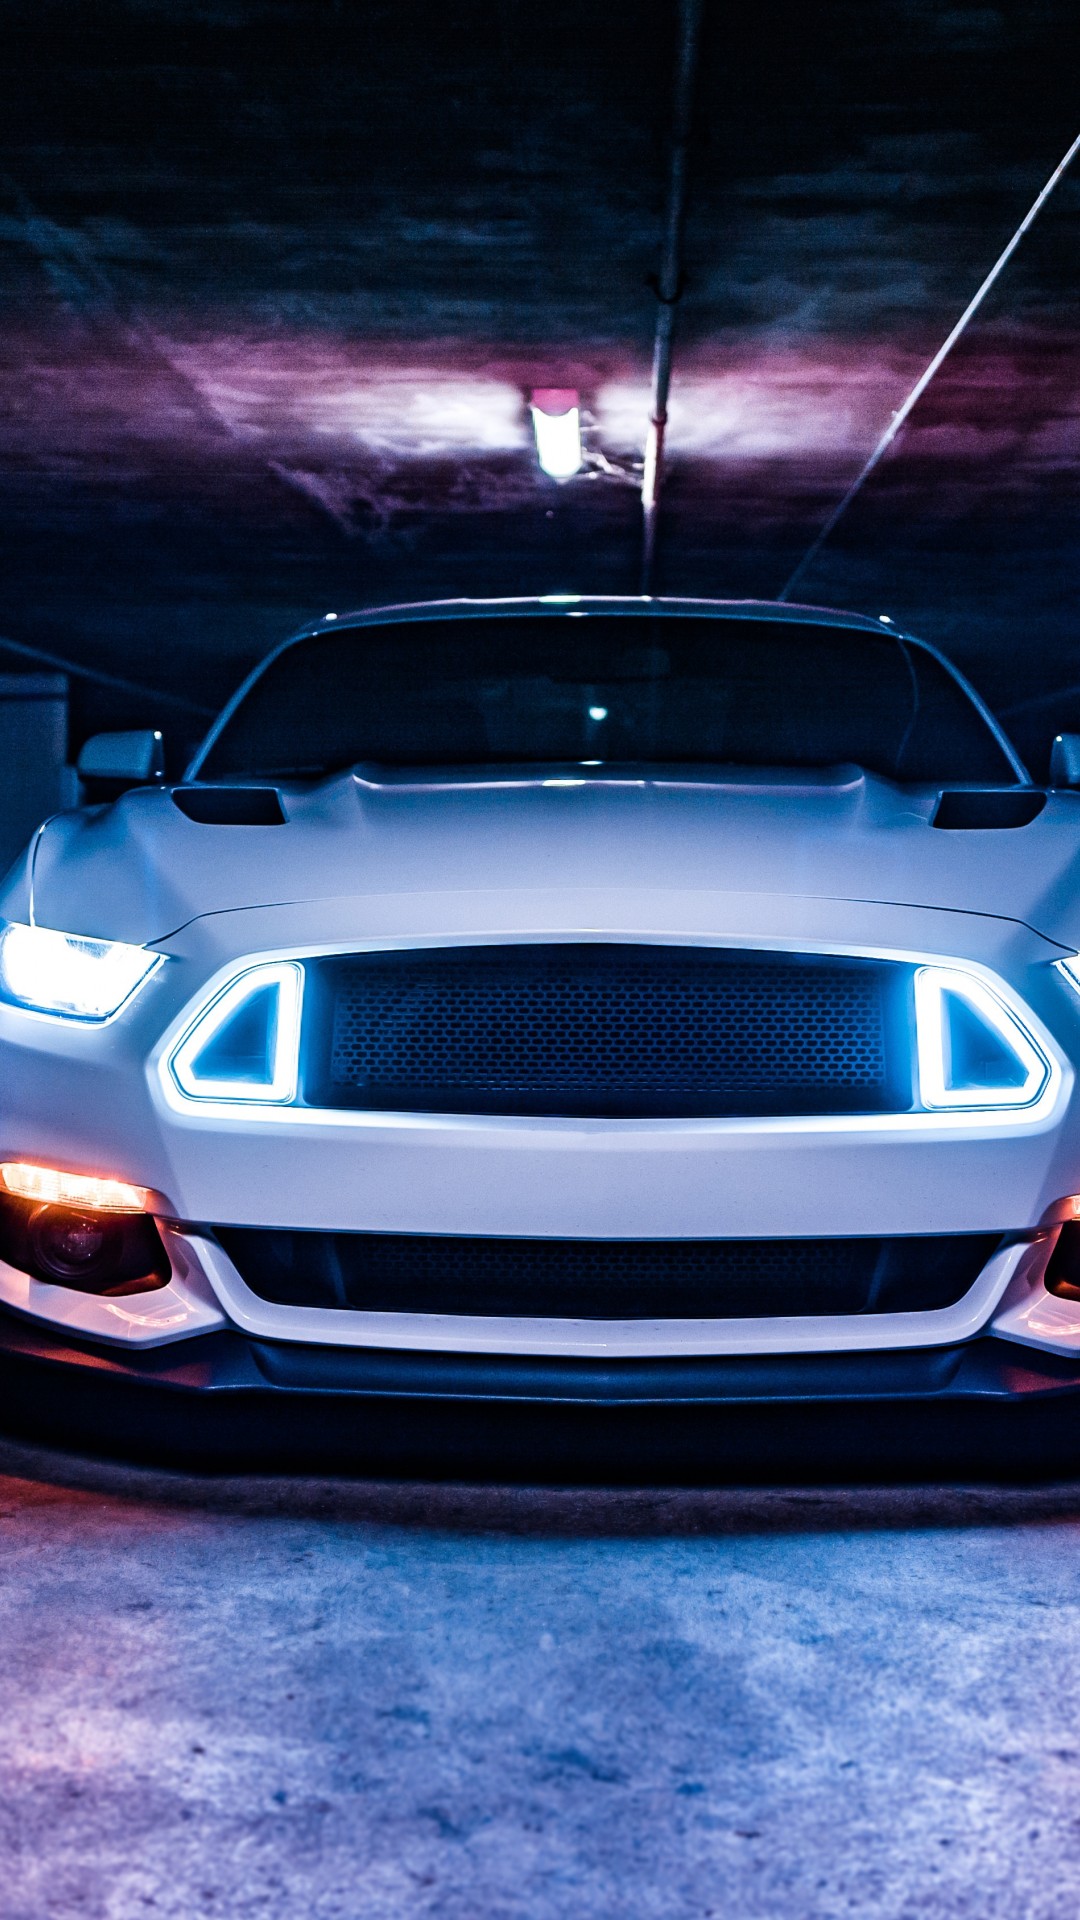 Ford Mustang Neon lights 5K Wallpaper iPhone 6 Plus Hot Desktop and background for your PC and mobile